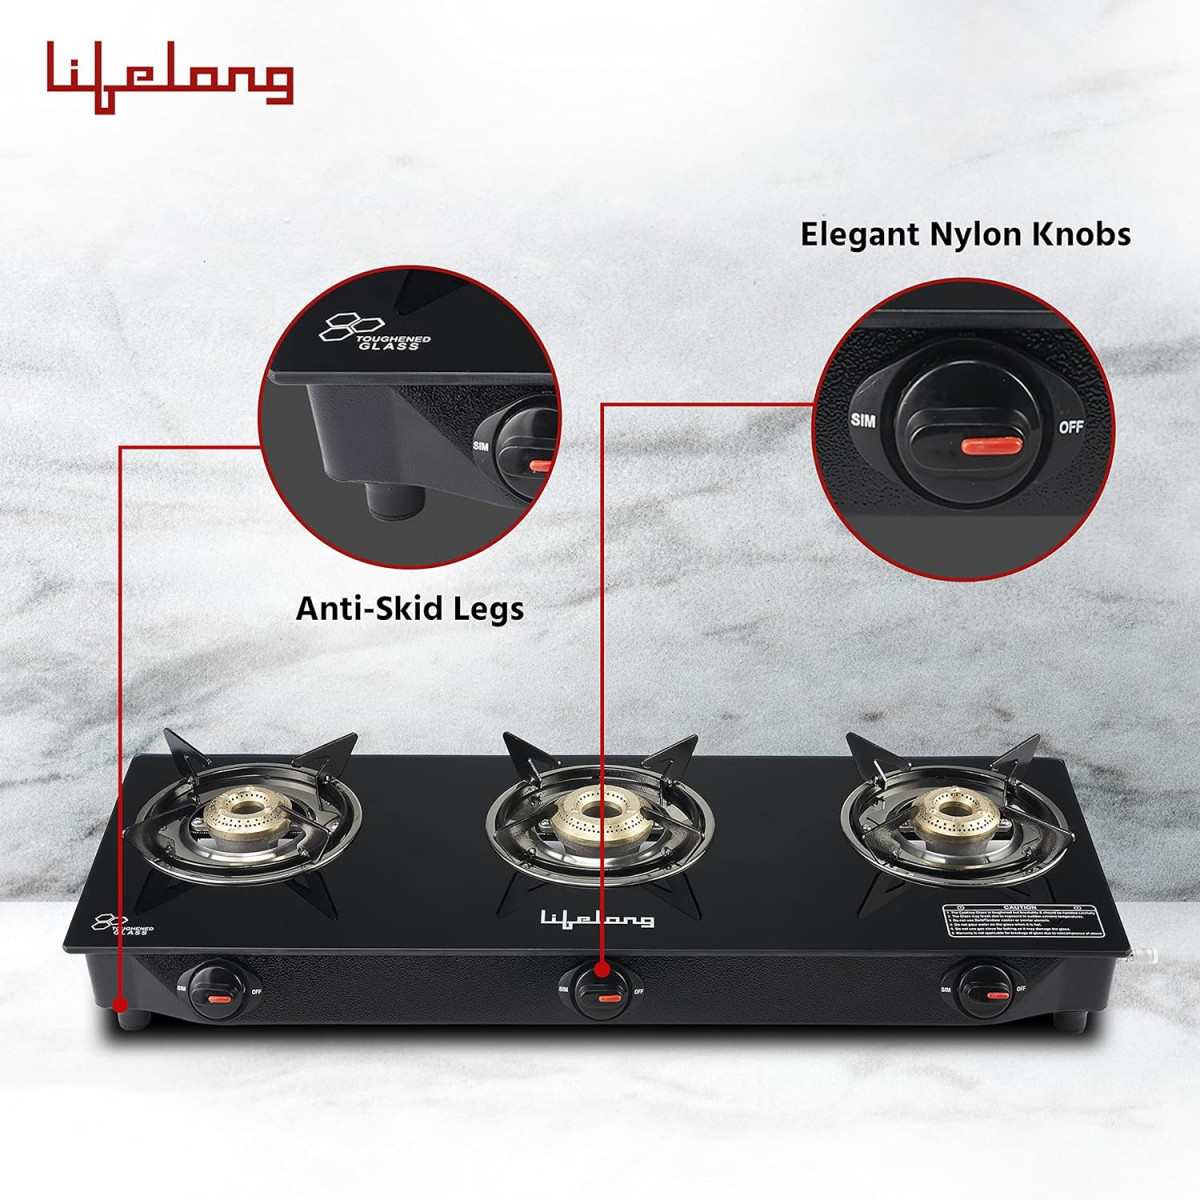 Lifelong LLGS930 Manual Ignition High Efficiency 3 Burner Gas Stove with Toughened Glass Top ISI Certified For LPG Use 1 Year Warranty Doorstep Service Black